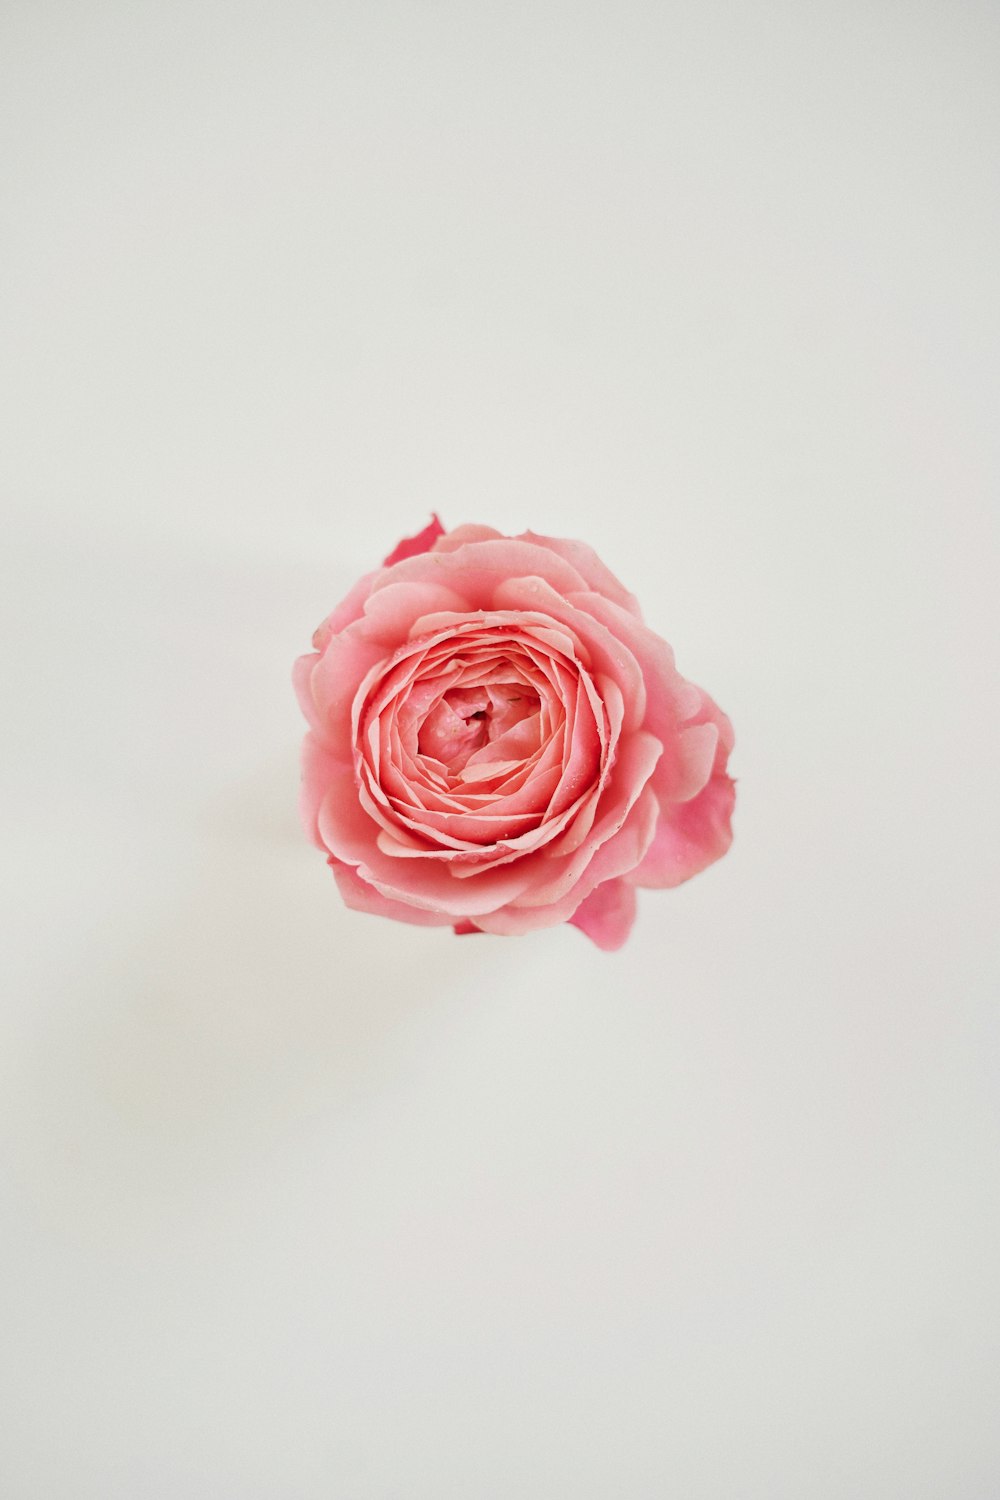 a single pink rose on a white background